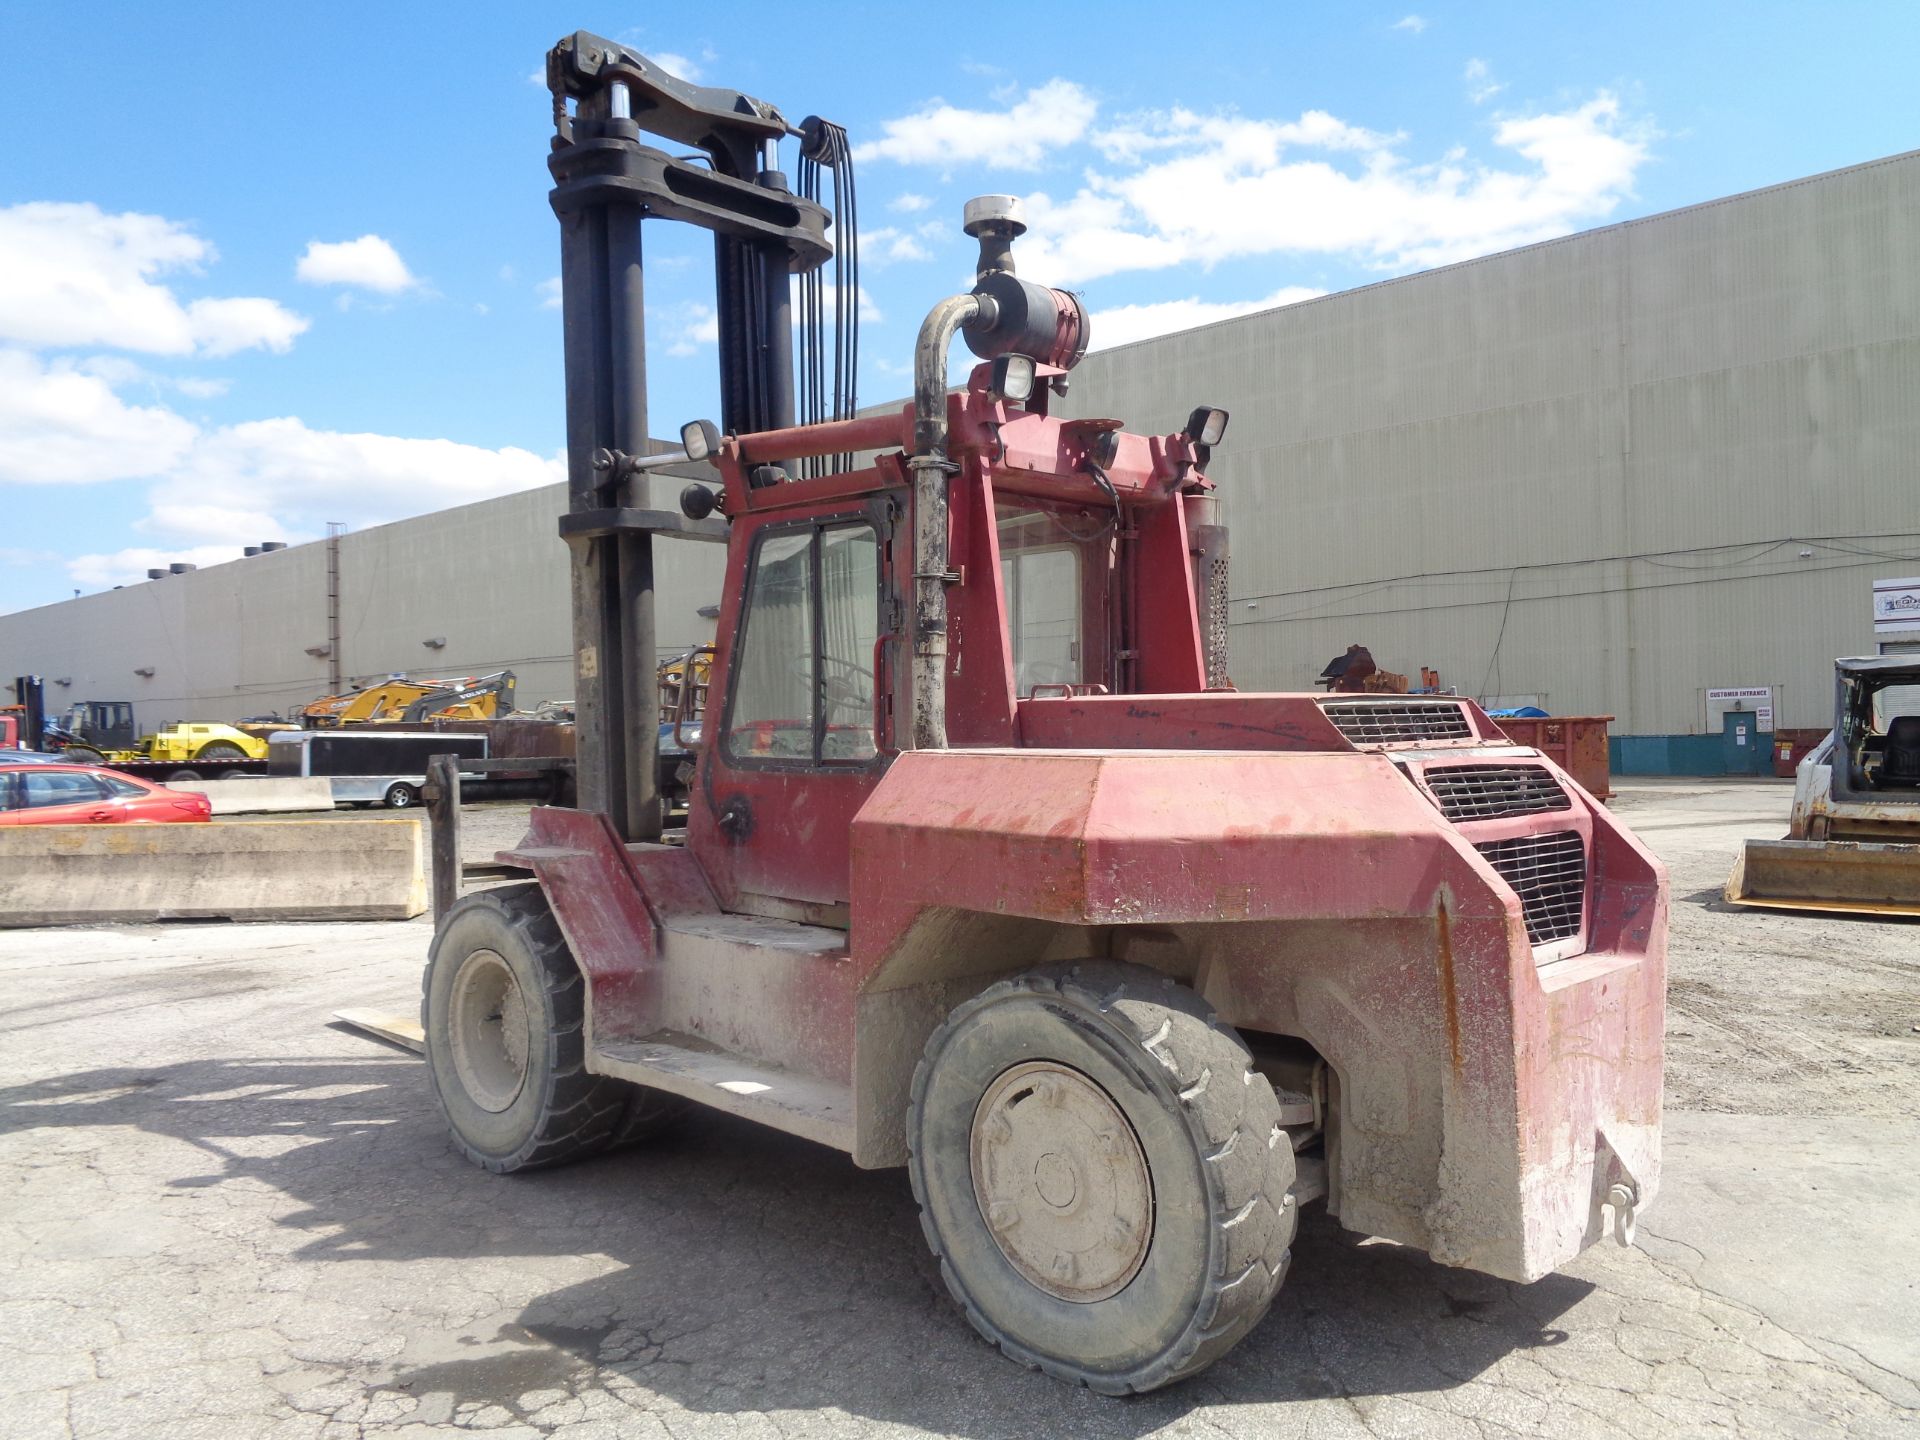 1990 Taylor TE300S 30,000 lb Forklift - Image 2 of 8